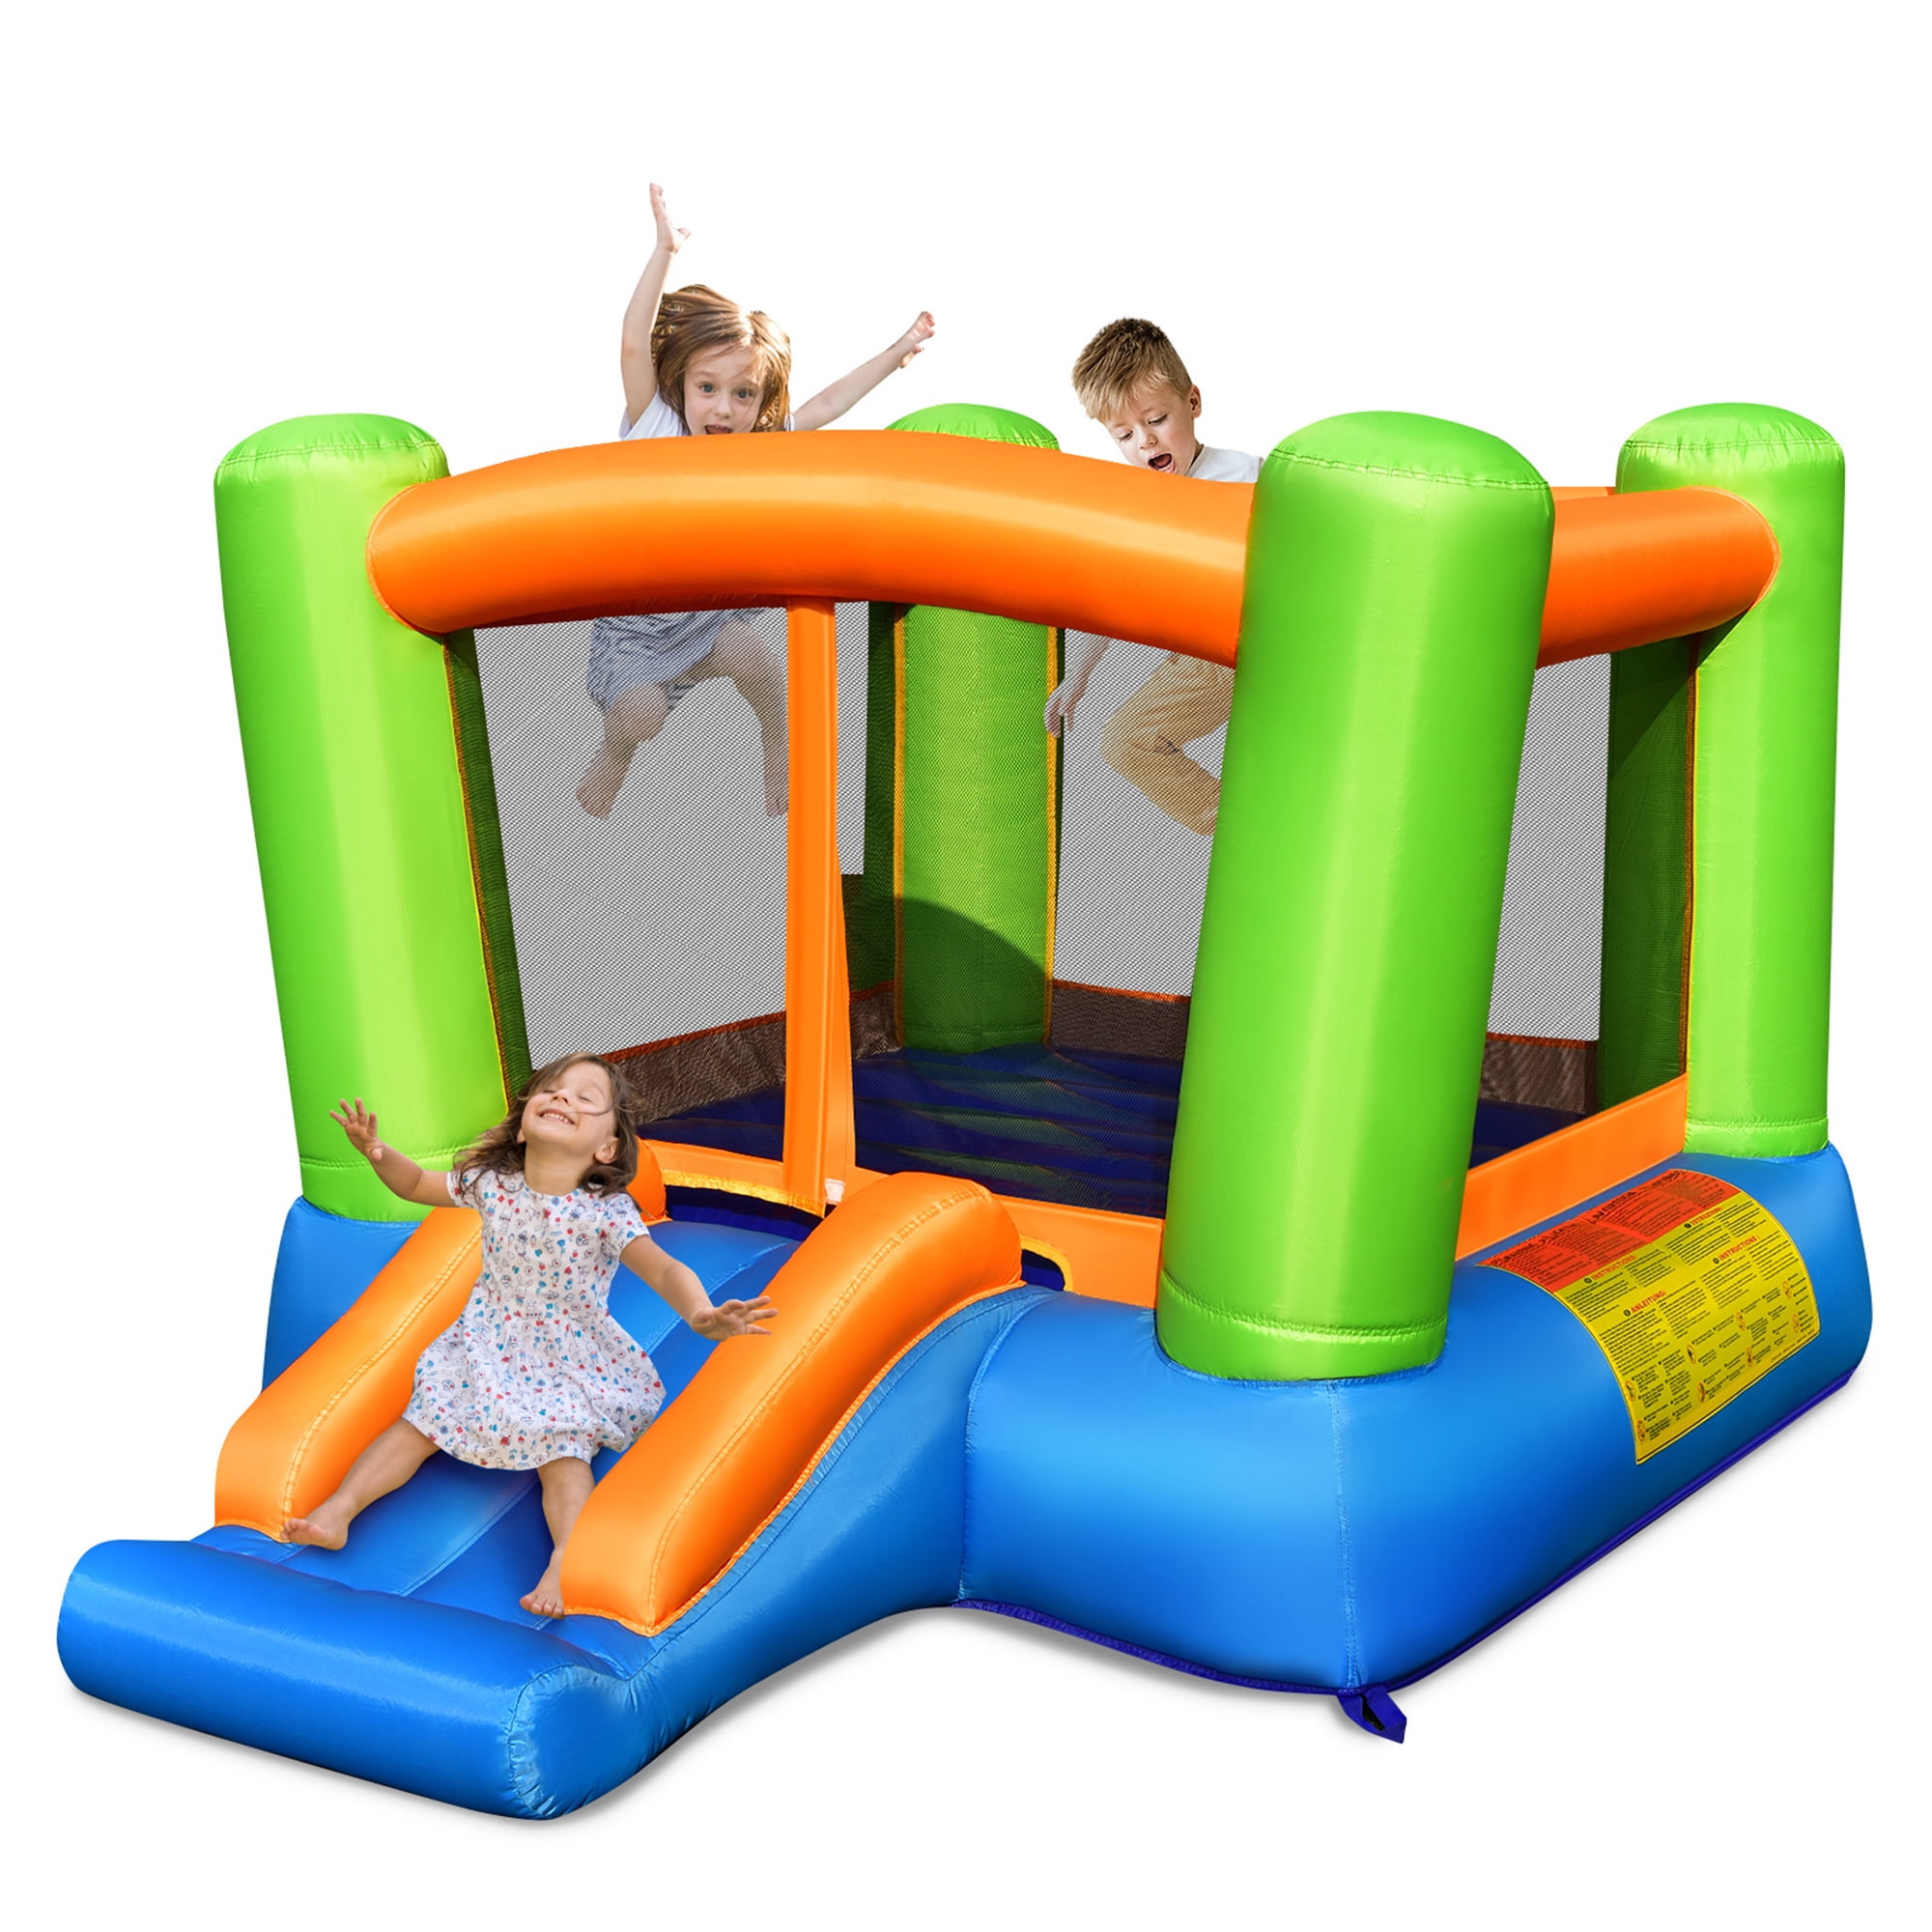 Sportspower My First Jump N' Play Bounce House With Slide,Multi-Color,144